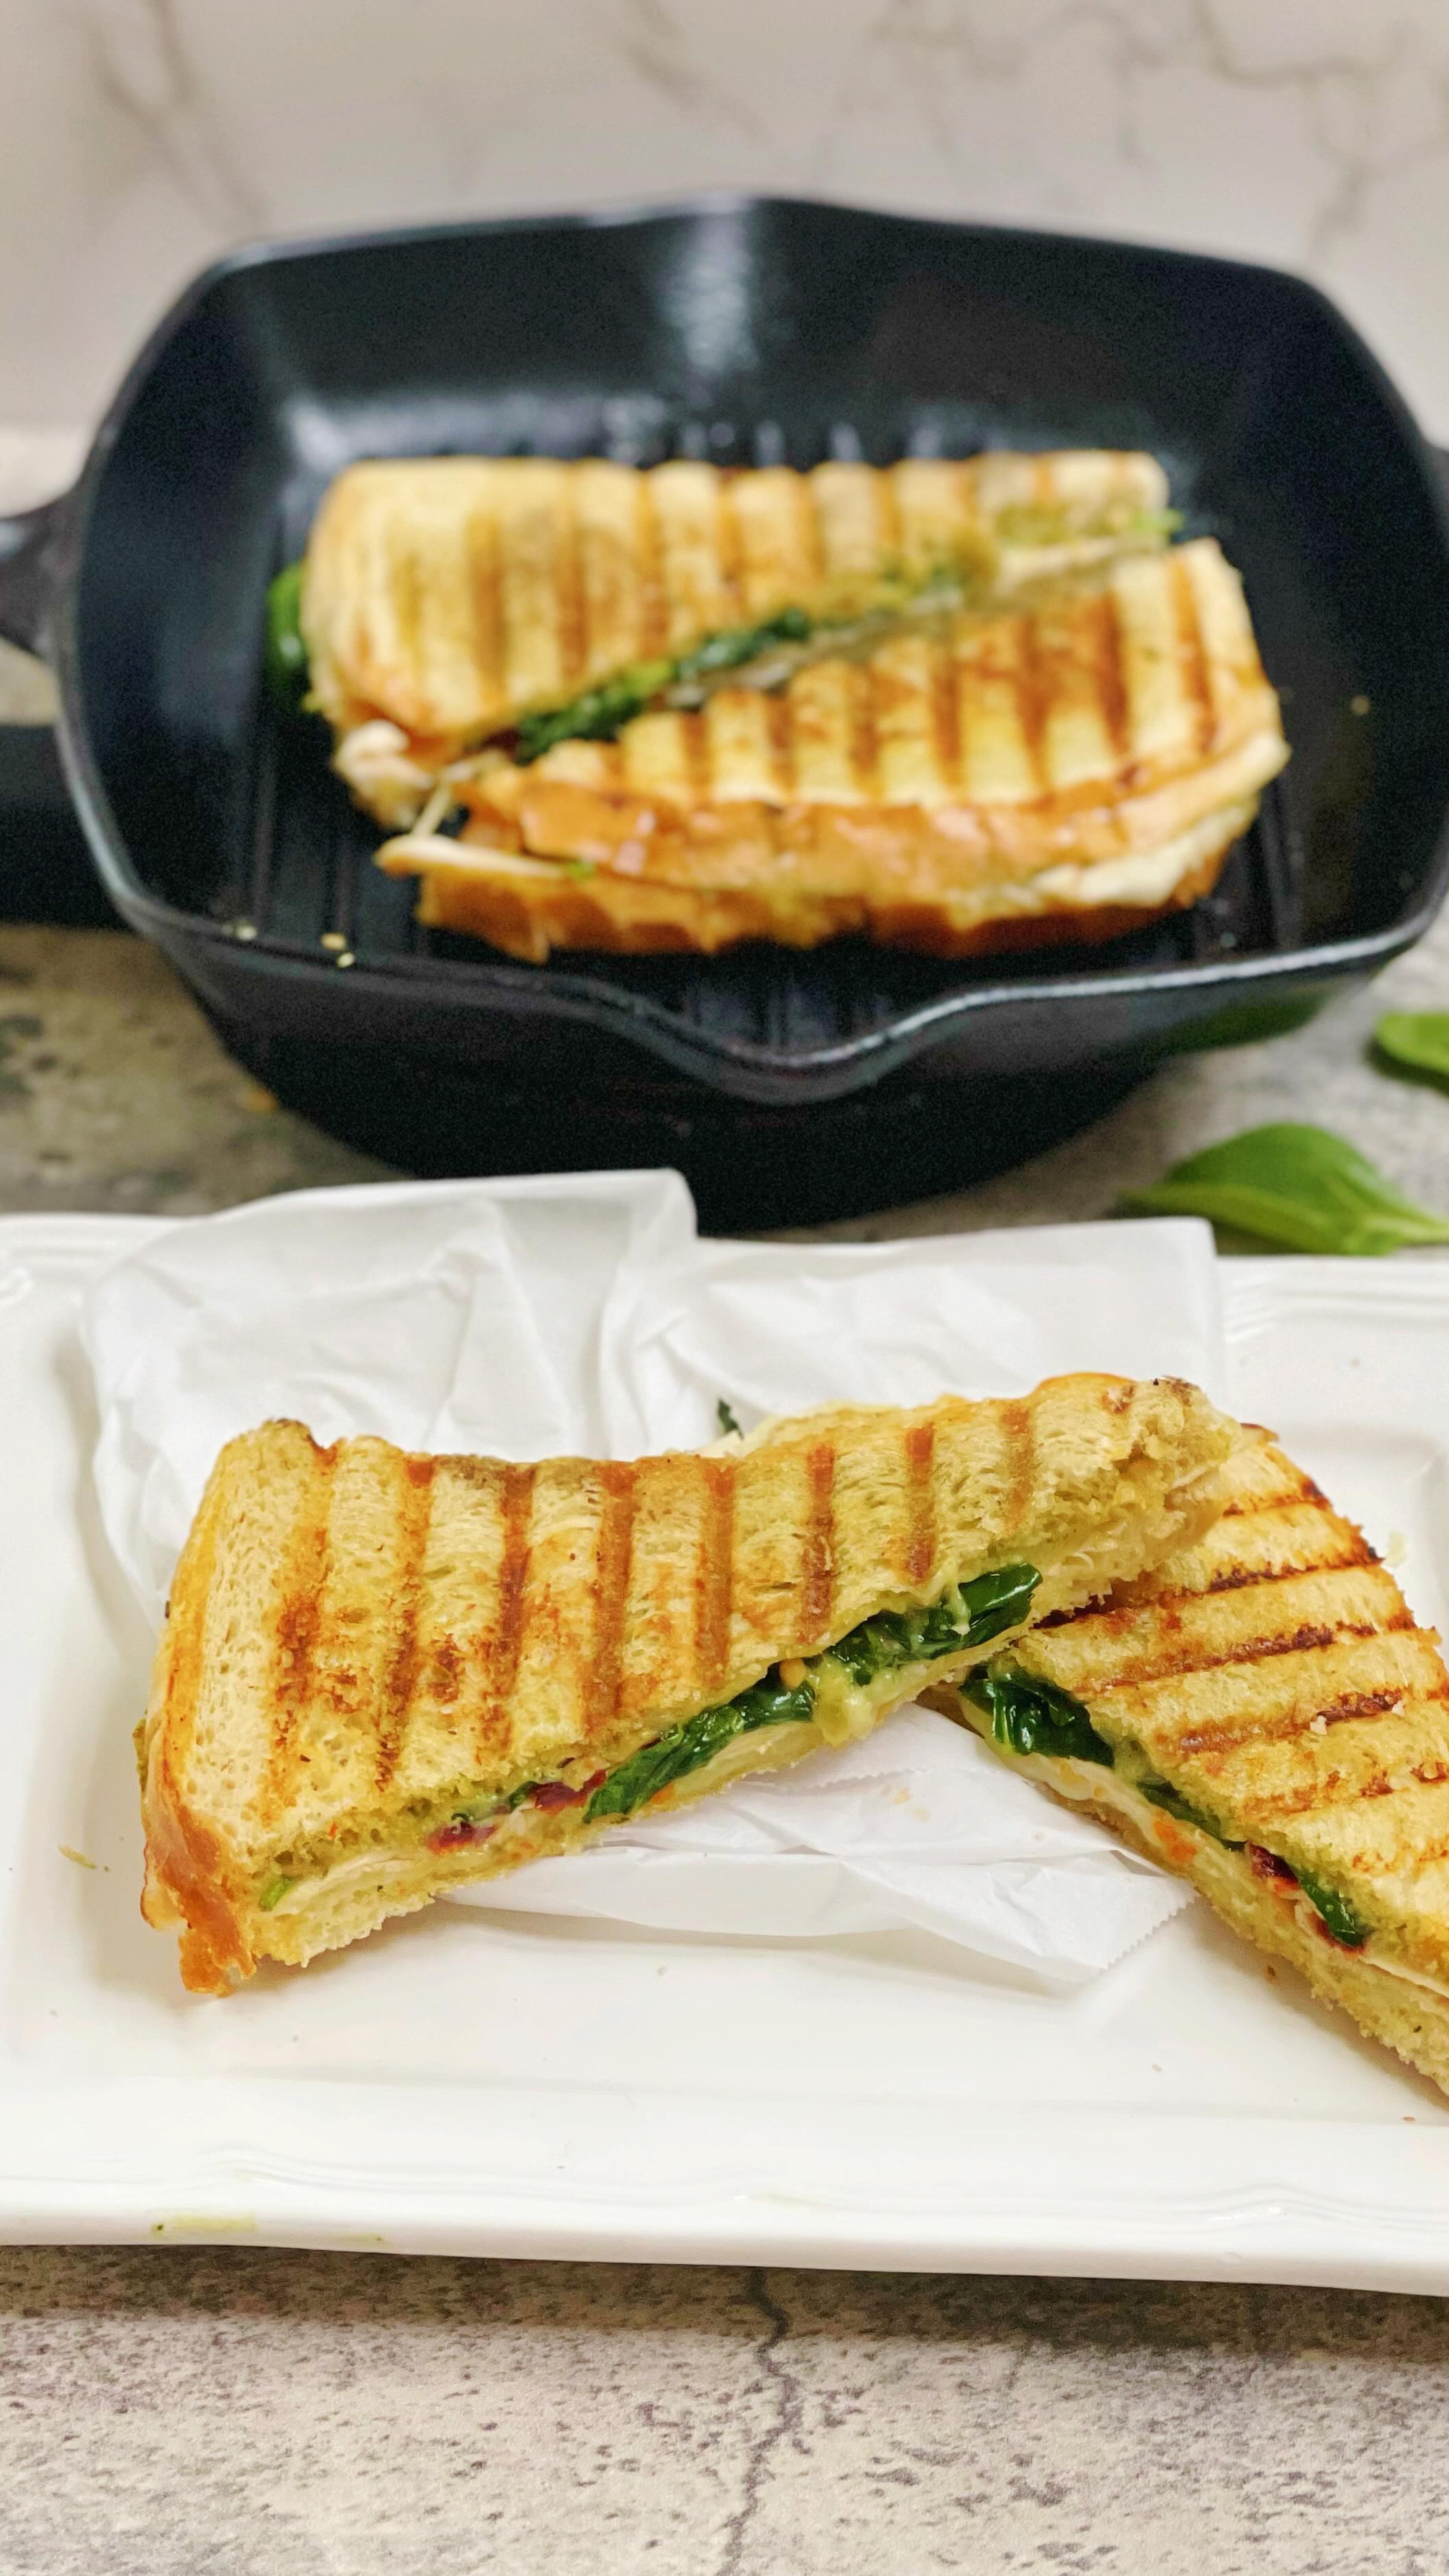 Chicken and Pesto Panini! Another @dinnerreinvented original recipe that is comfort food at its finest. Ingredients are below but  the best part is you can make this your own and add as much or as little as you want!

8 slices sourdough bread
16 thinly sliced provolone cheese
16 thinly sliced oven roasted chicken breast
1 cup basil pesto
1 cup mayonnaise
1 cup sun dried tomatoes, packed in oil
1/2 cup extra virgin olive oil
4 cups packed organic spinach
kosher salt to taste

#panini #pesto #chickenrecipes #sandwich #grilledcheese #grilledchicken #copycatrecipe #viralrecipes #viralreels #foodblogger #momblogger #kidsfood #comfortfood #castironcooking #dinnerreinvented